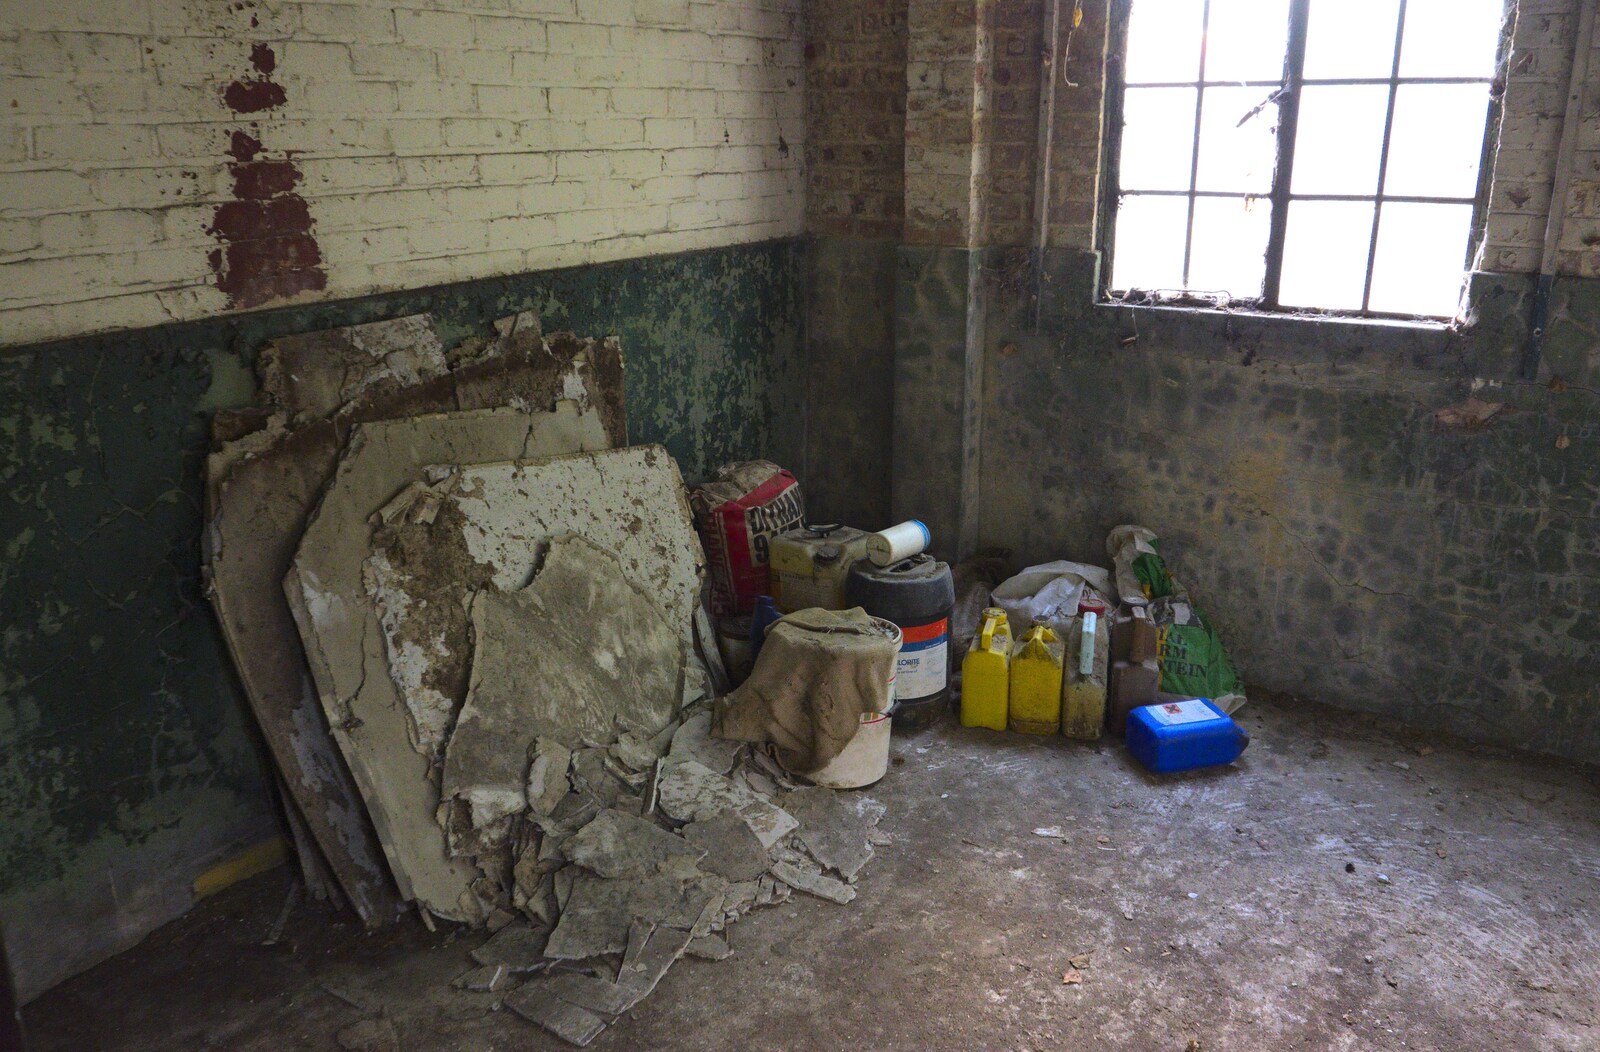 Detritus in the corner of a building from A 1940s Timewarp, Site 4, Bungay Airfield, Flixton, Suffolk - 9th June 2022